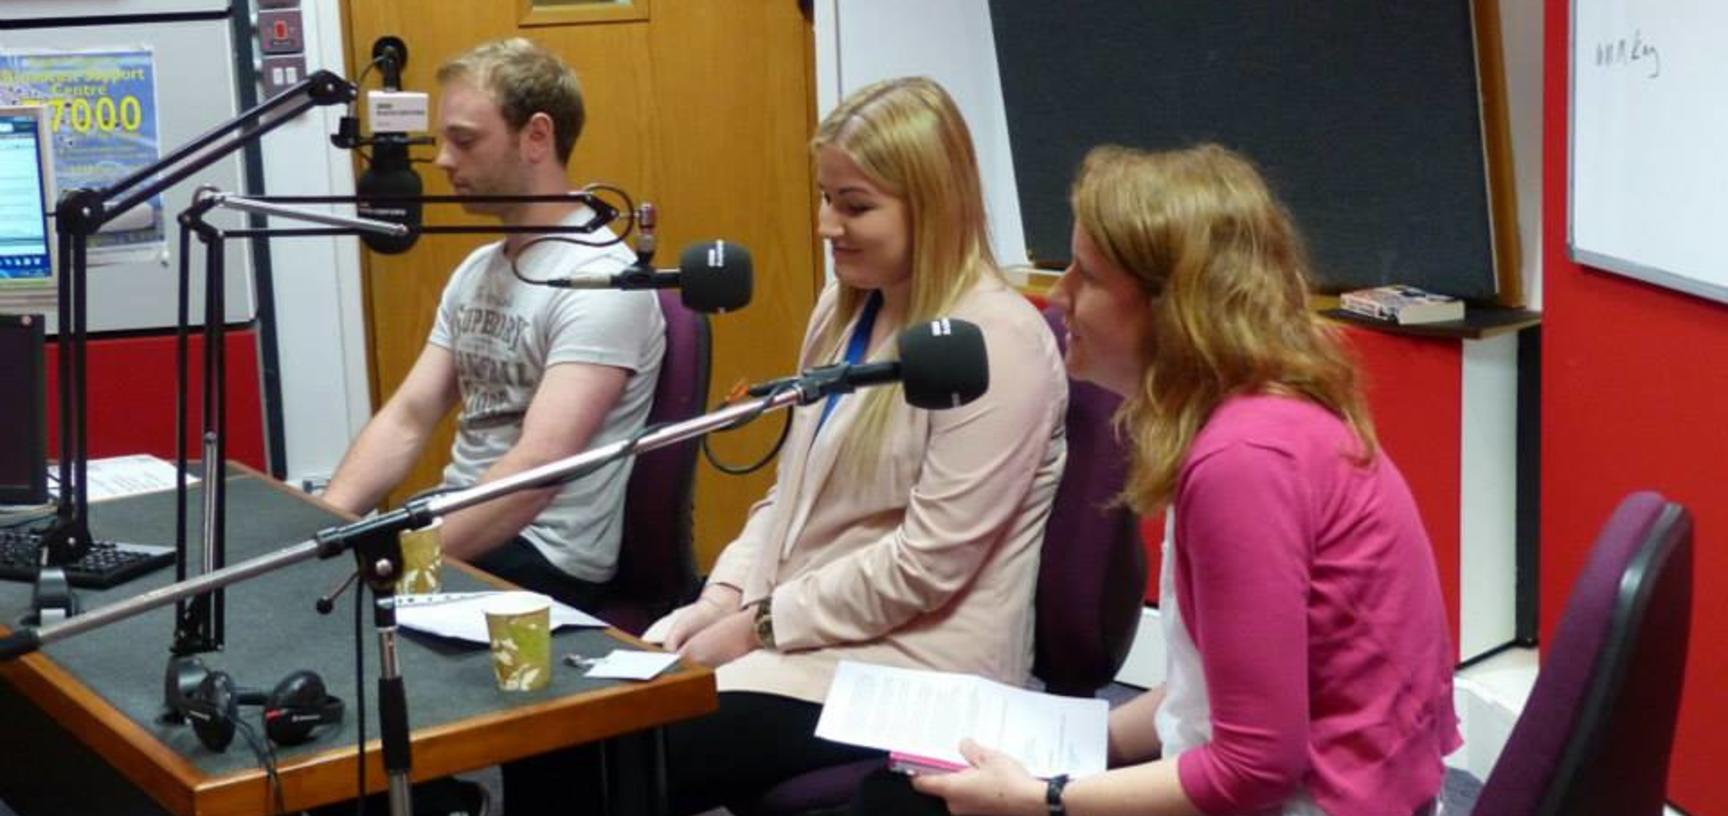 University of Oxford apprentices at Radio Oxford talking about Apprenticeships